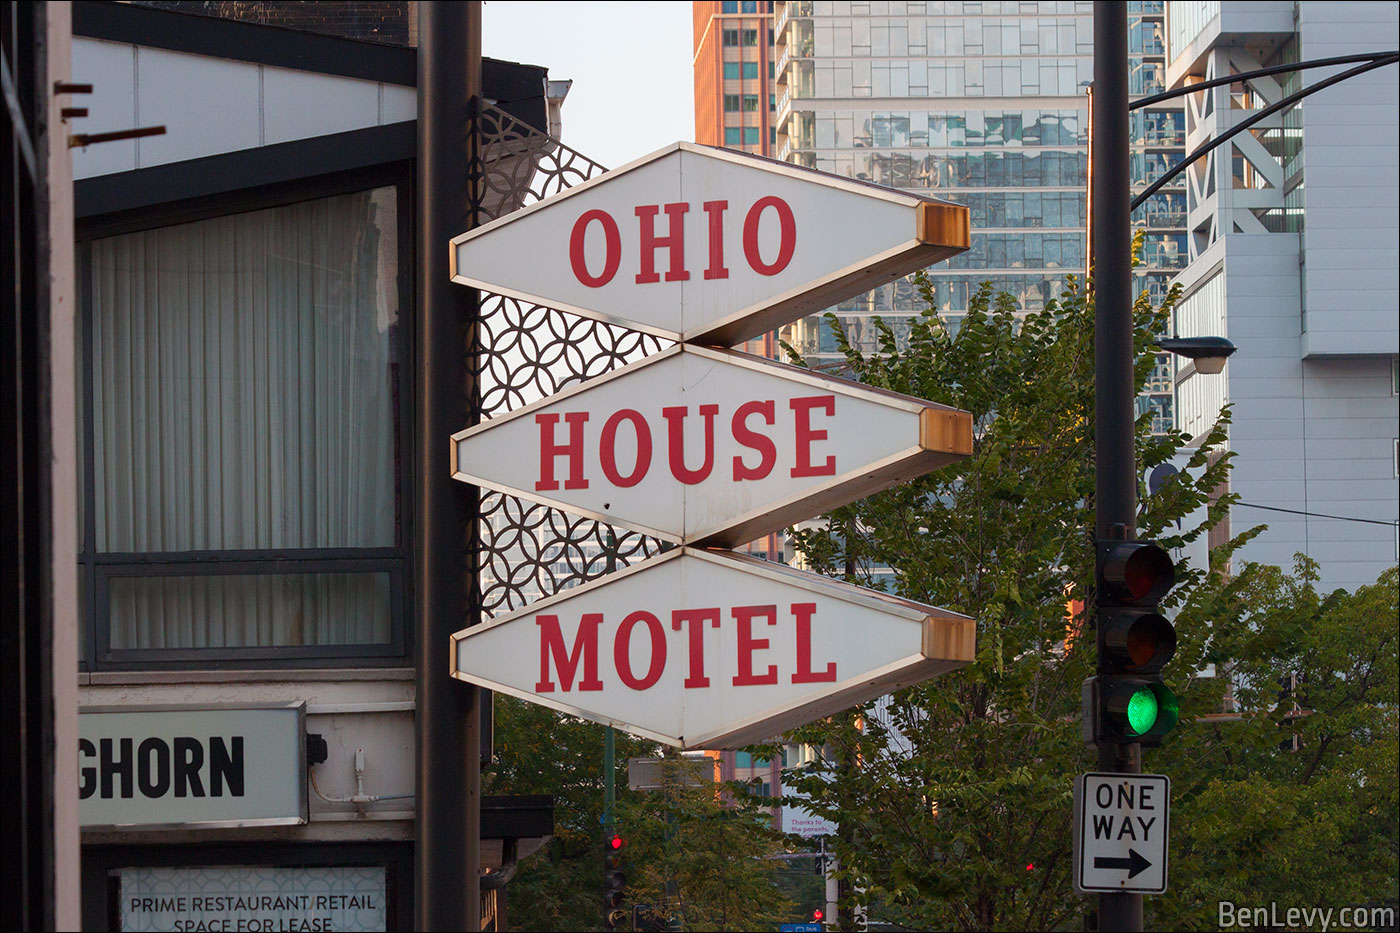 The sign of the Ohio House Motel